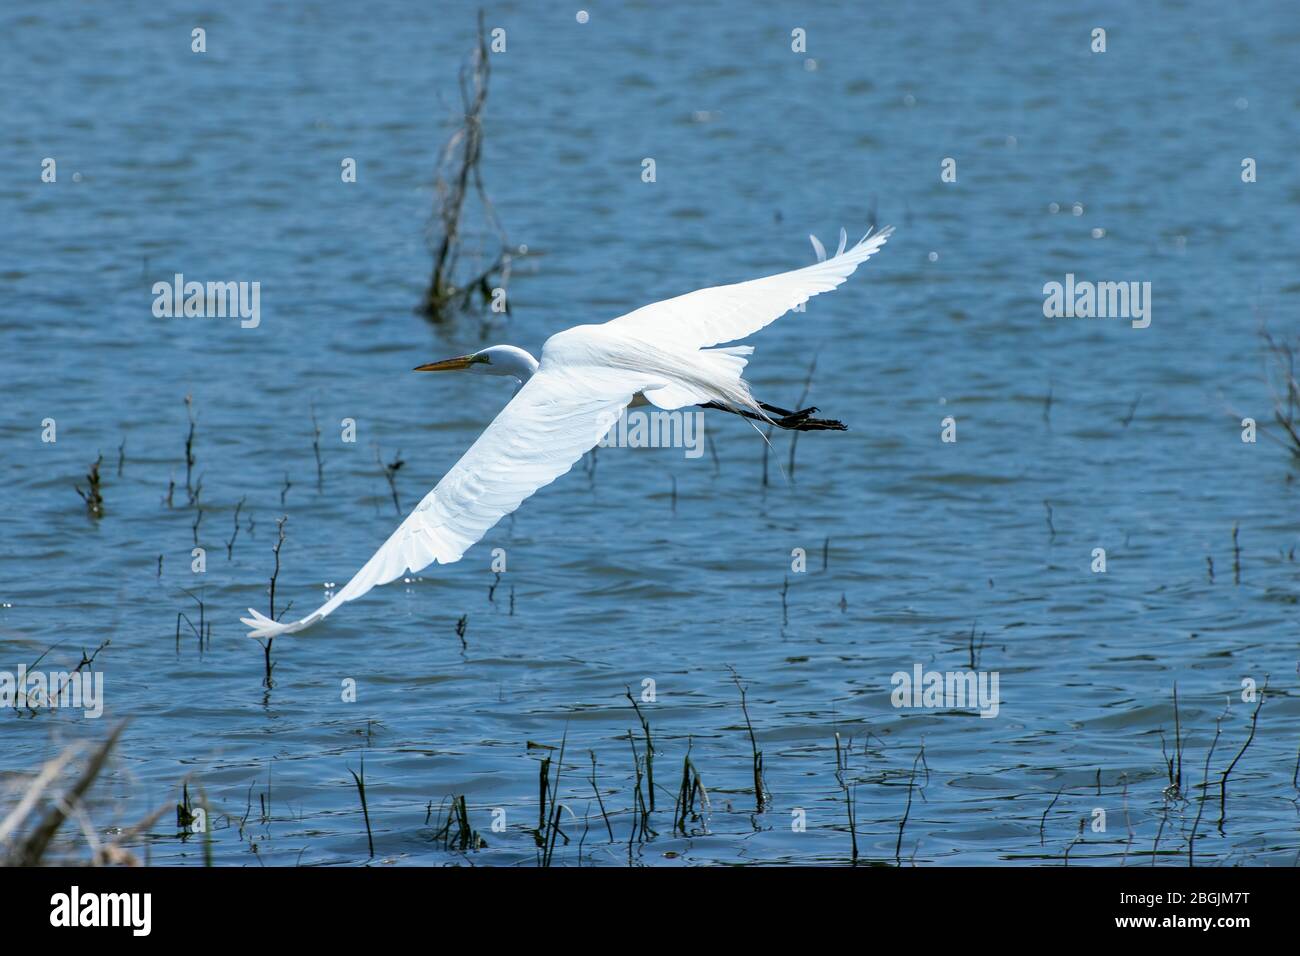 A graceful and beautiful White Egret soaring gracefully over the water of a lake filled with twigs and sticks near the shore. Stock Photo